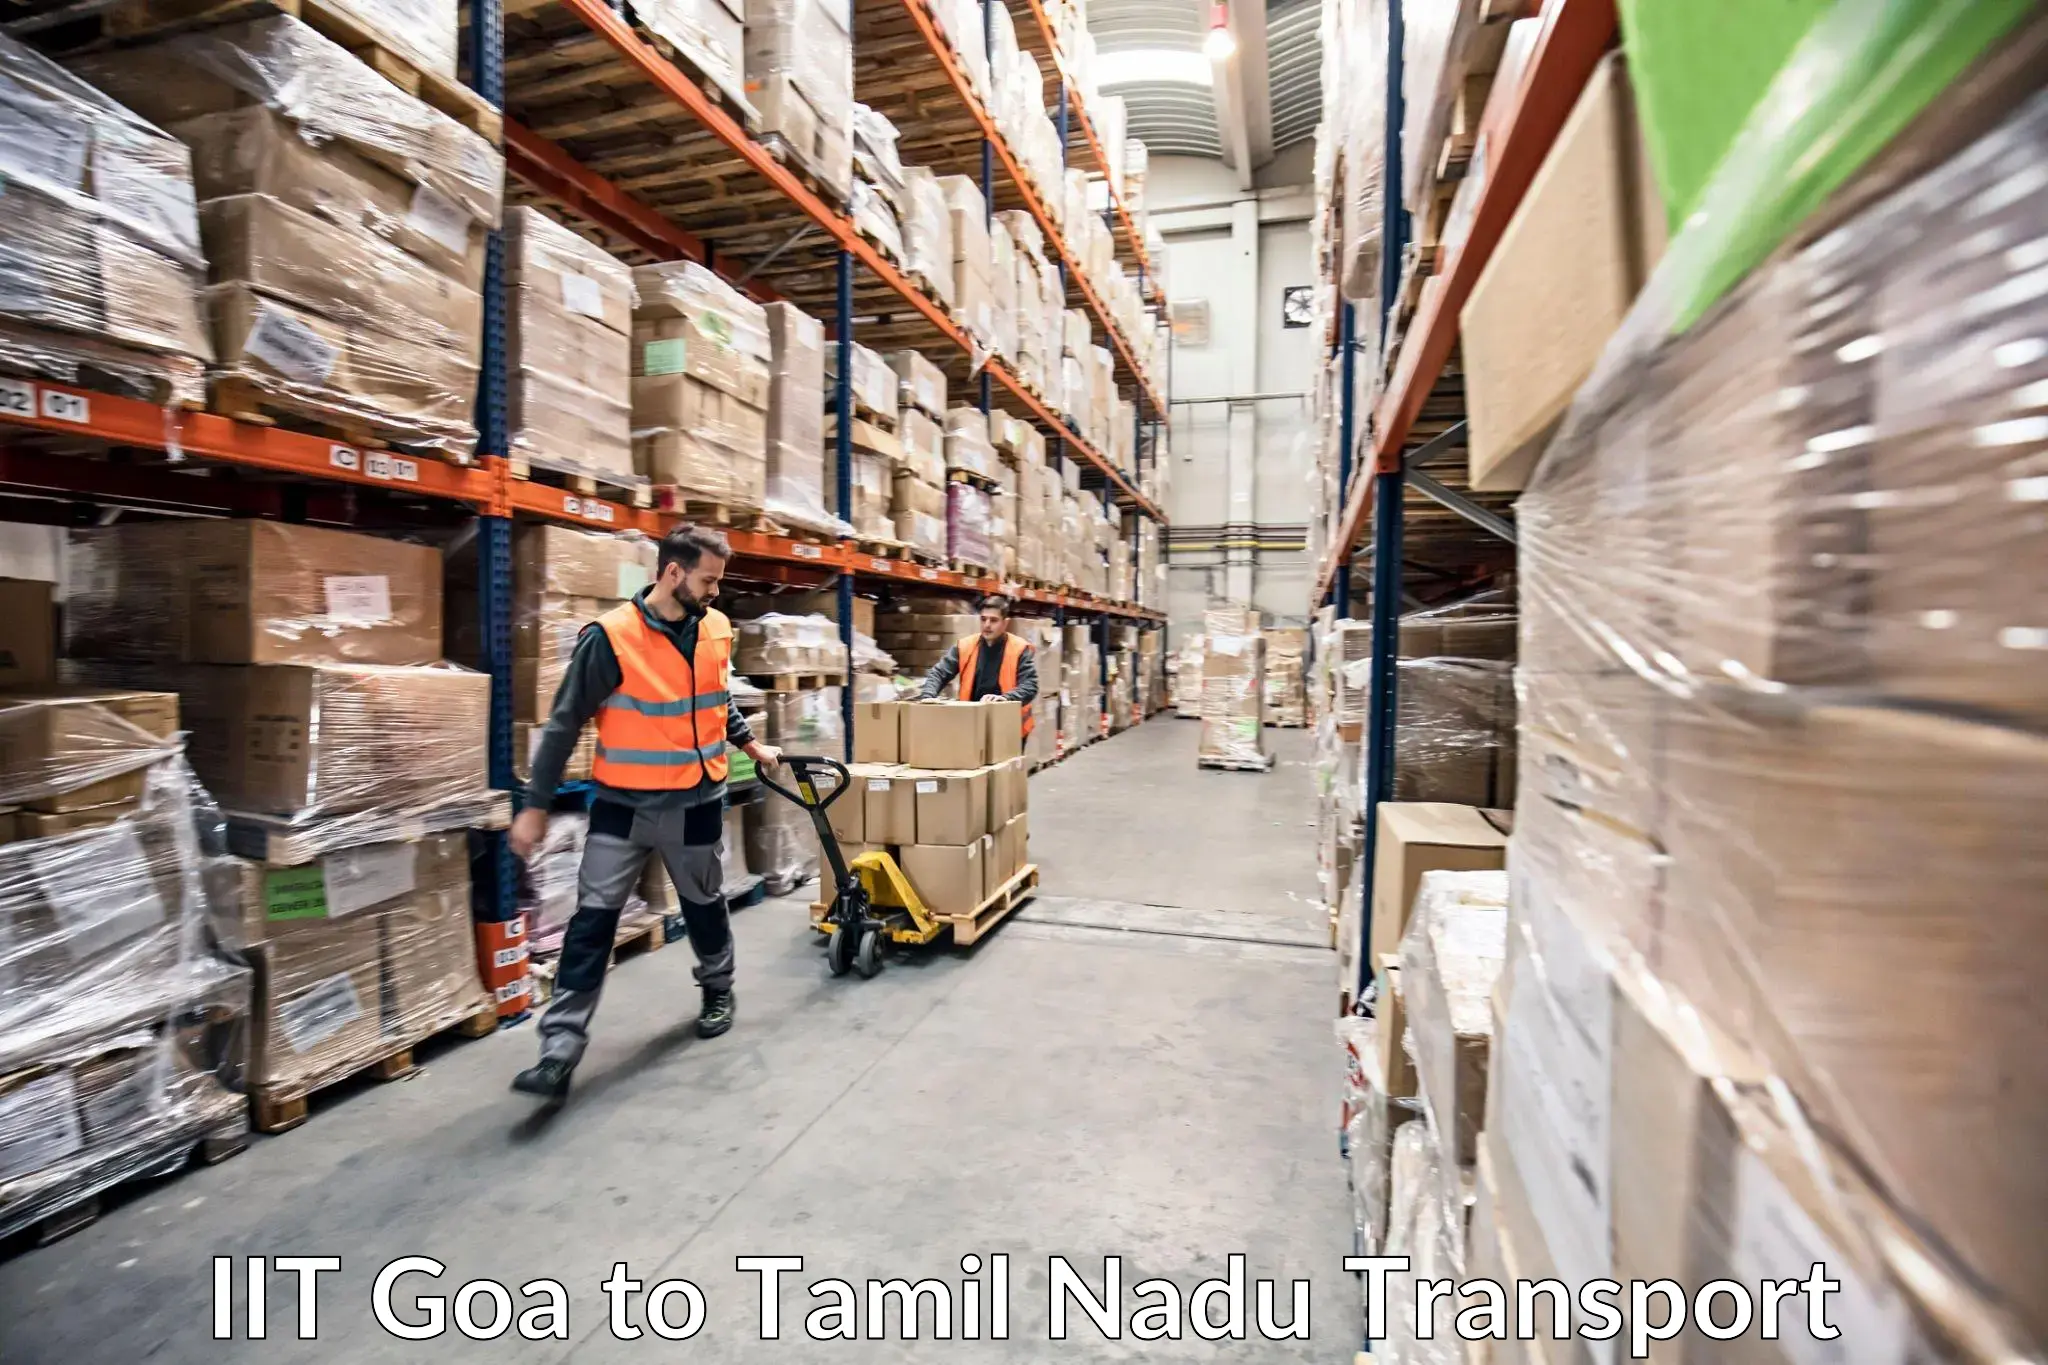 Daily parcel service transport IIT Goa to Tamil Nadu